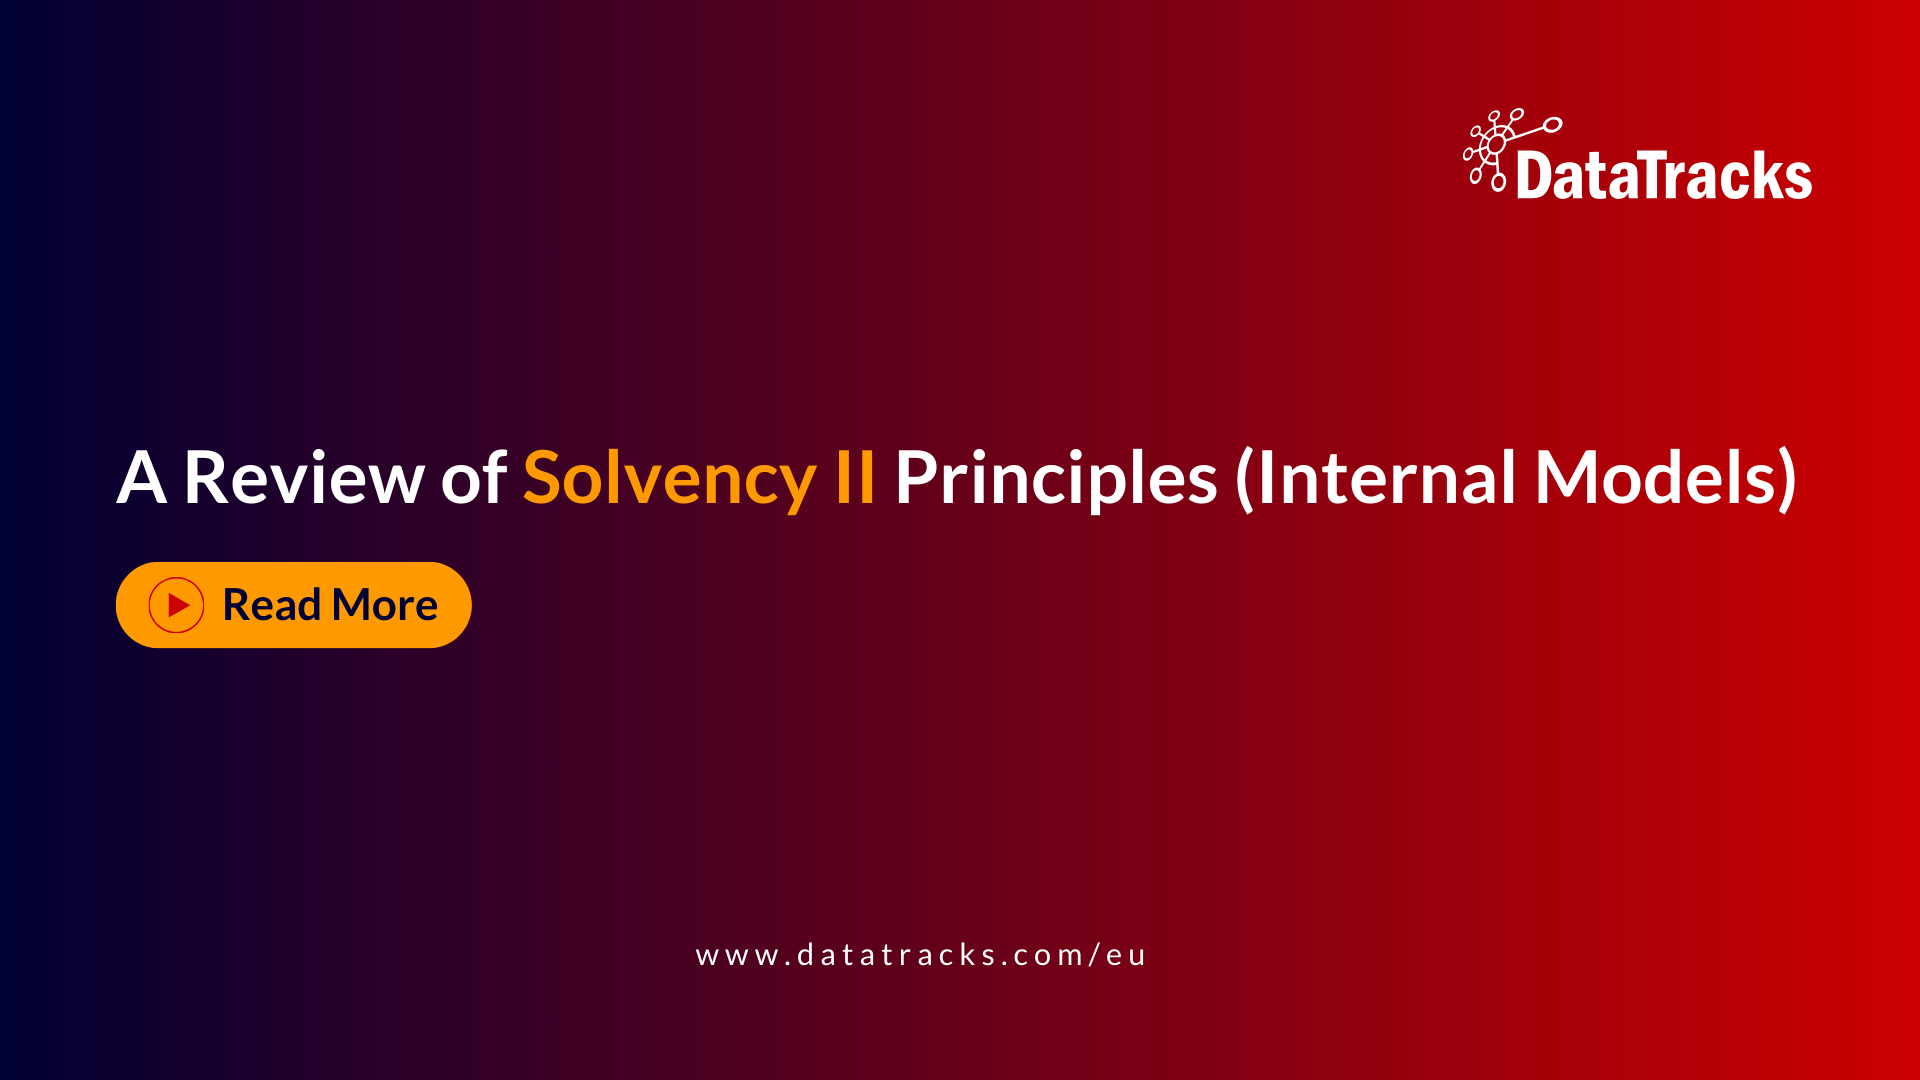 A Review of Solvency II Principles (Internal Models)